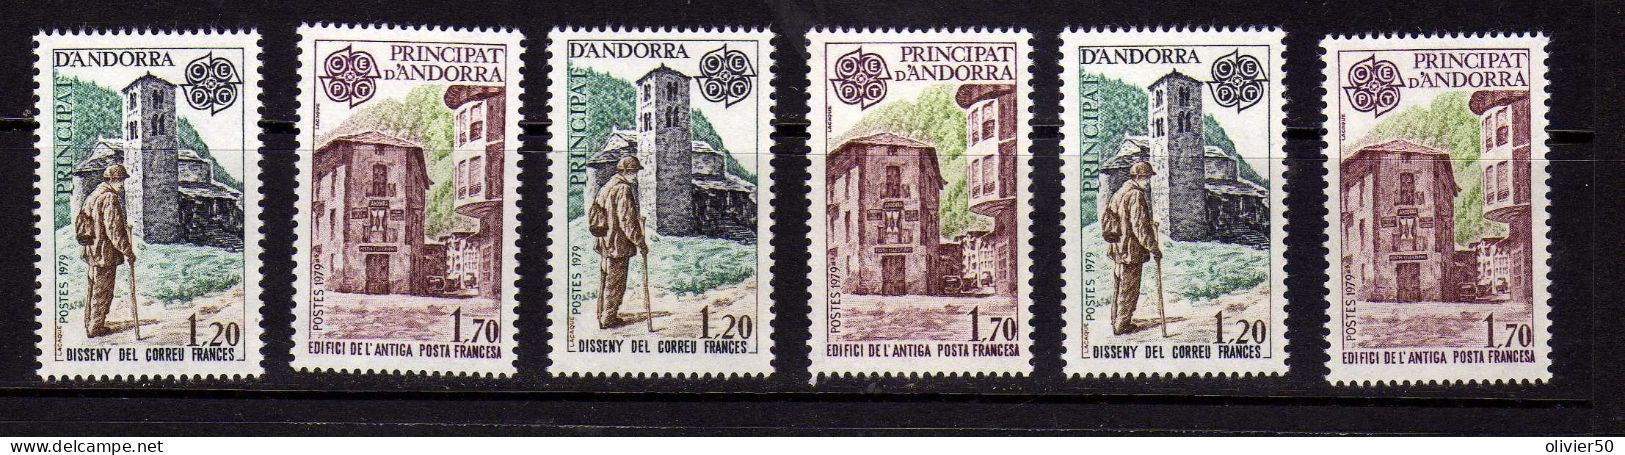 Andorre Francaise - Europa - Histoire Postale - Neufs** - MNH  - 3 Ex. - Unused Stamps